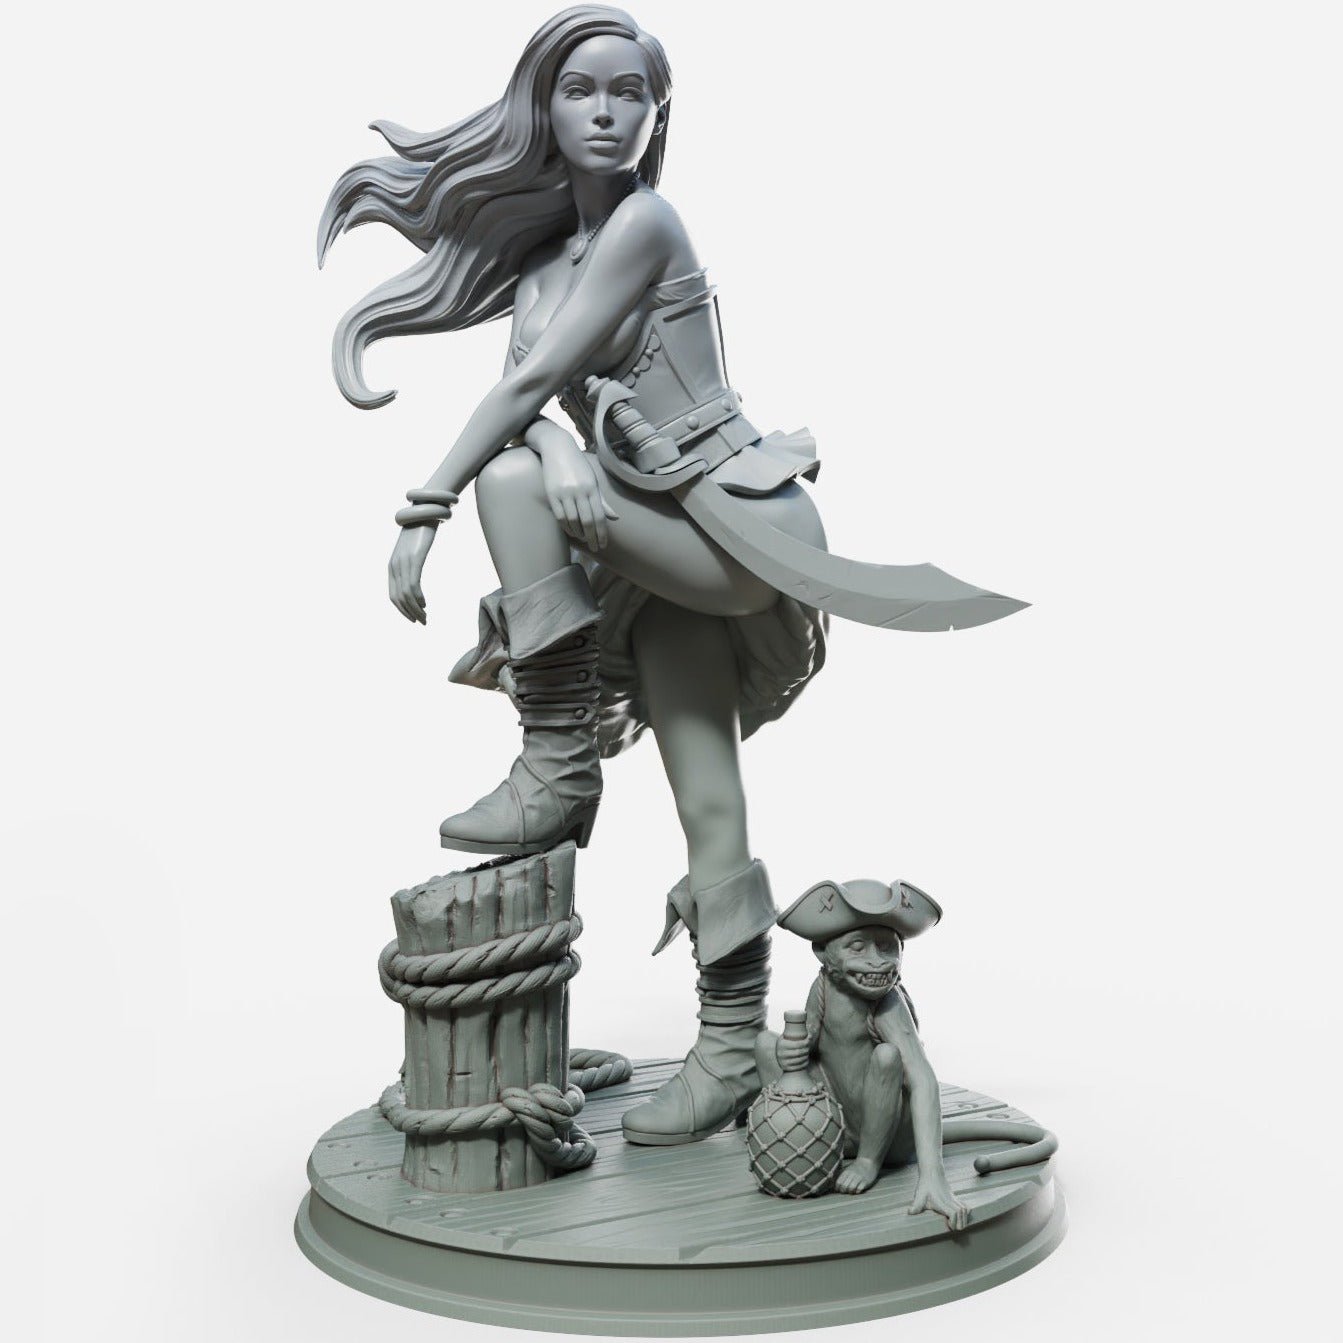 Marina 1 3d Printed miniature FanArt by Female Miniatures Scaled Collectables Statues & Figurines